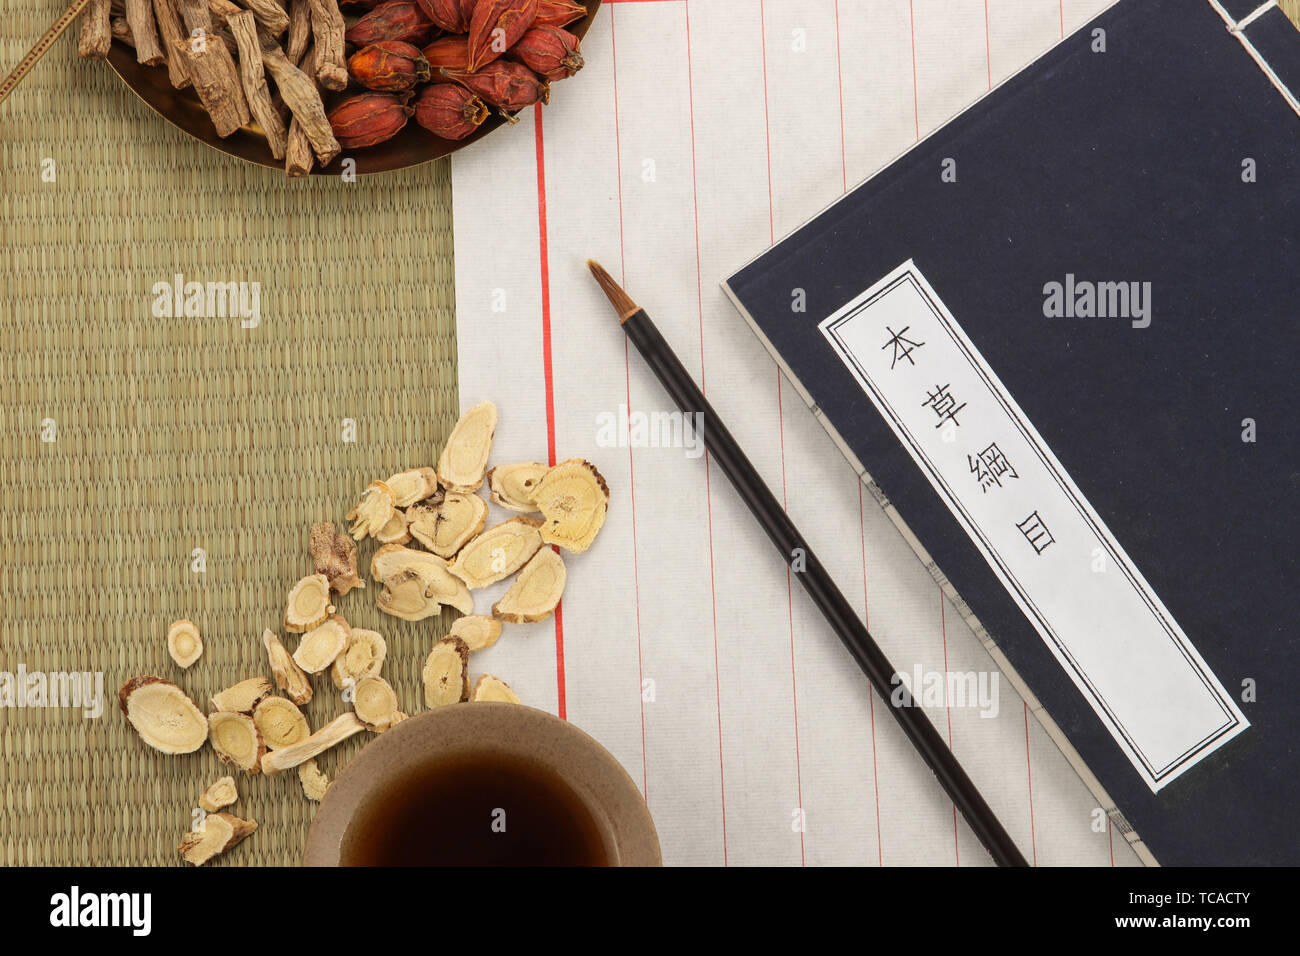 Chinese herbs and prescriptions on the table Stock Photo